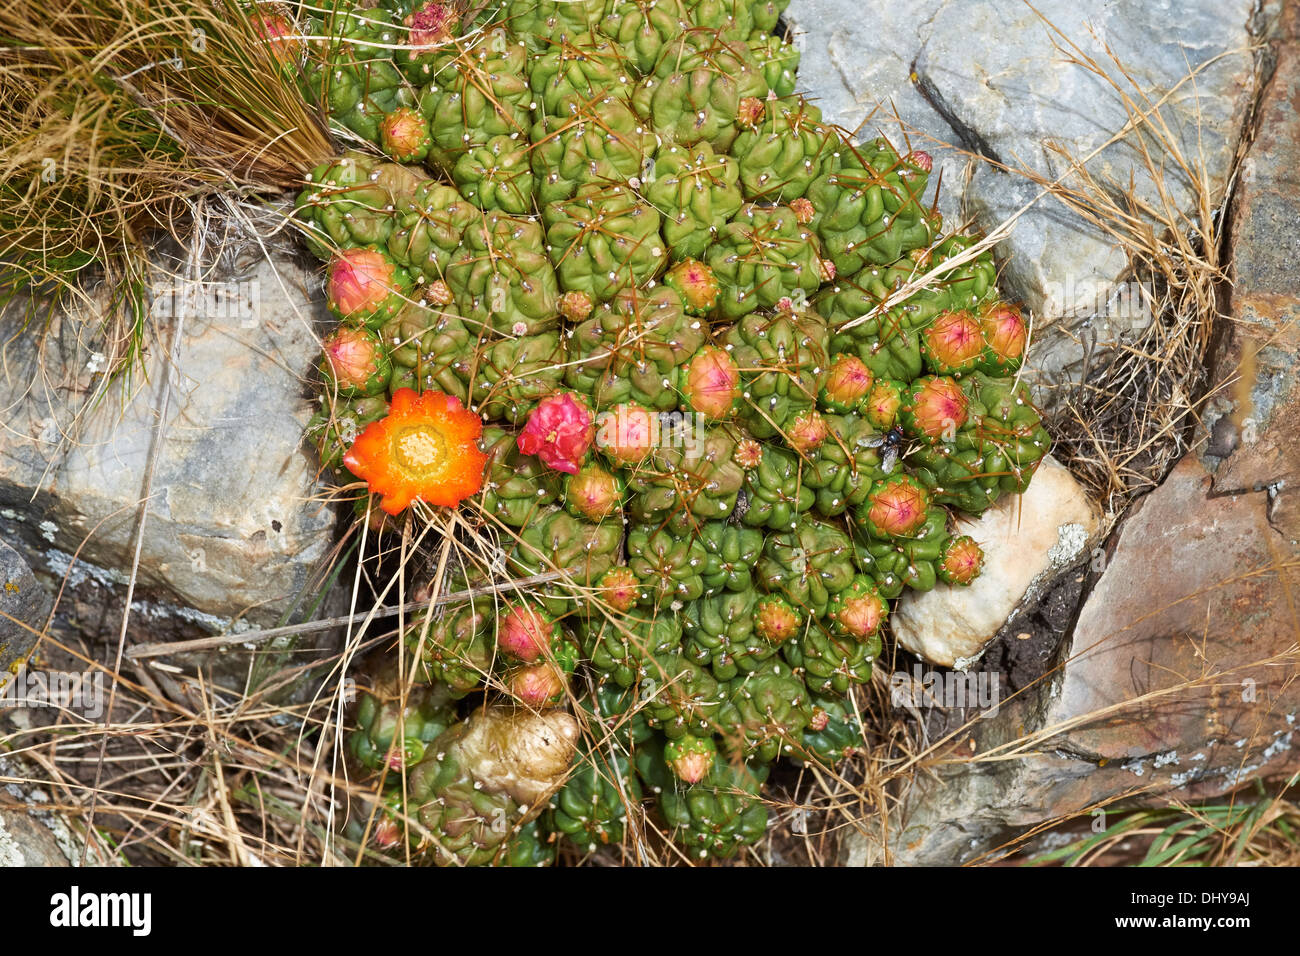 A flowering Opuntoid Cactus high up in the Peruvian Andes, South America. Stock Photo